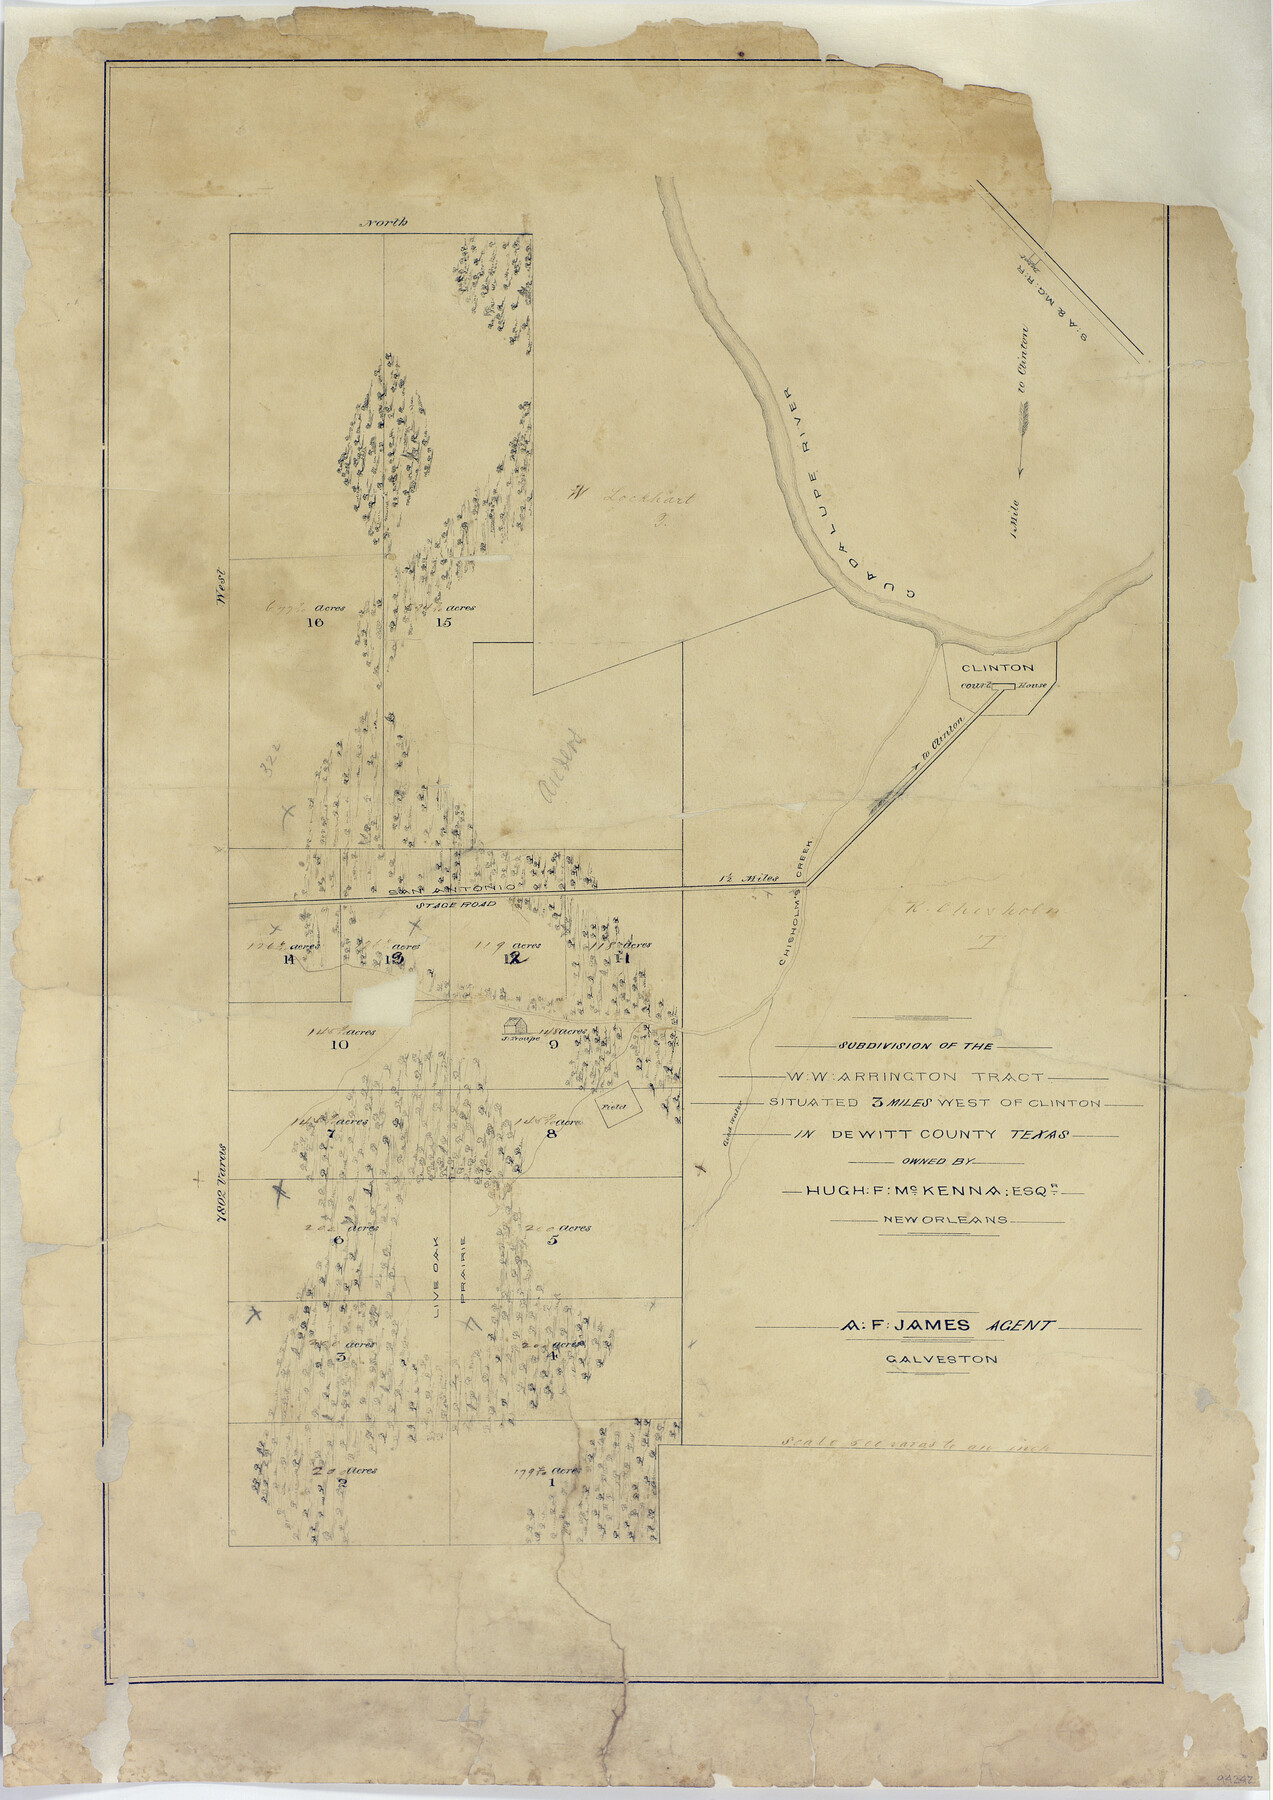 94242, Subdivision of the W.W. Arrington Tract situated 3 miles west of Clinton in DeWitt County, Texas owned by Hugh F. McKenna, Esqr., New Orleans, General Map Collection